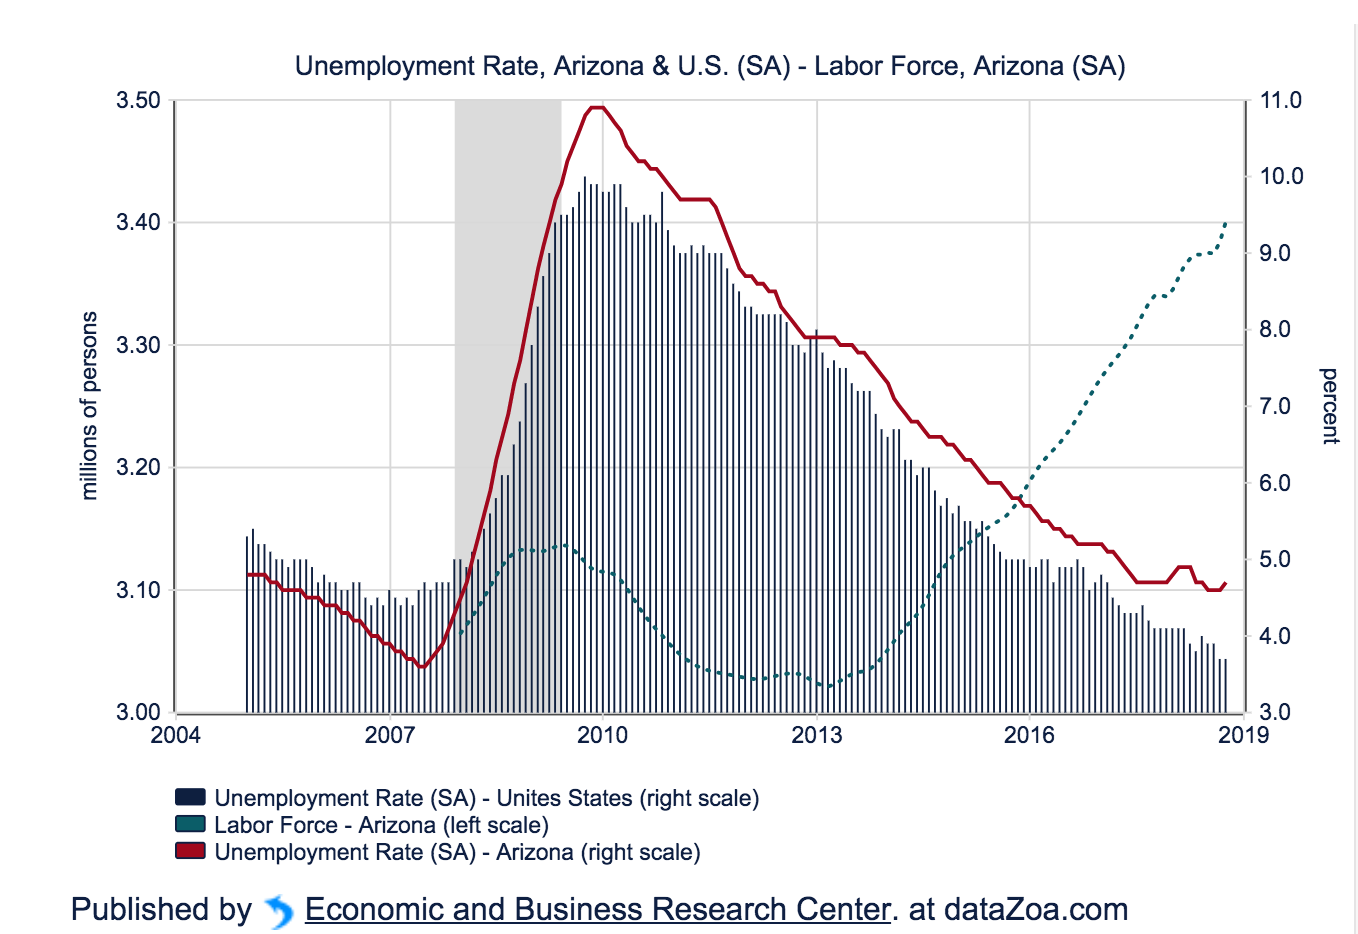 Arizona Labor Force and Unemployment Rate